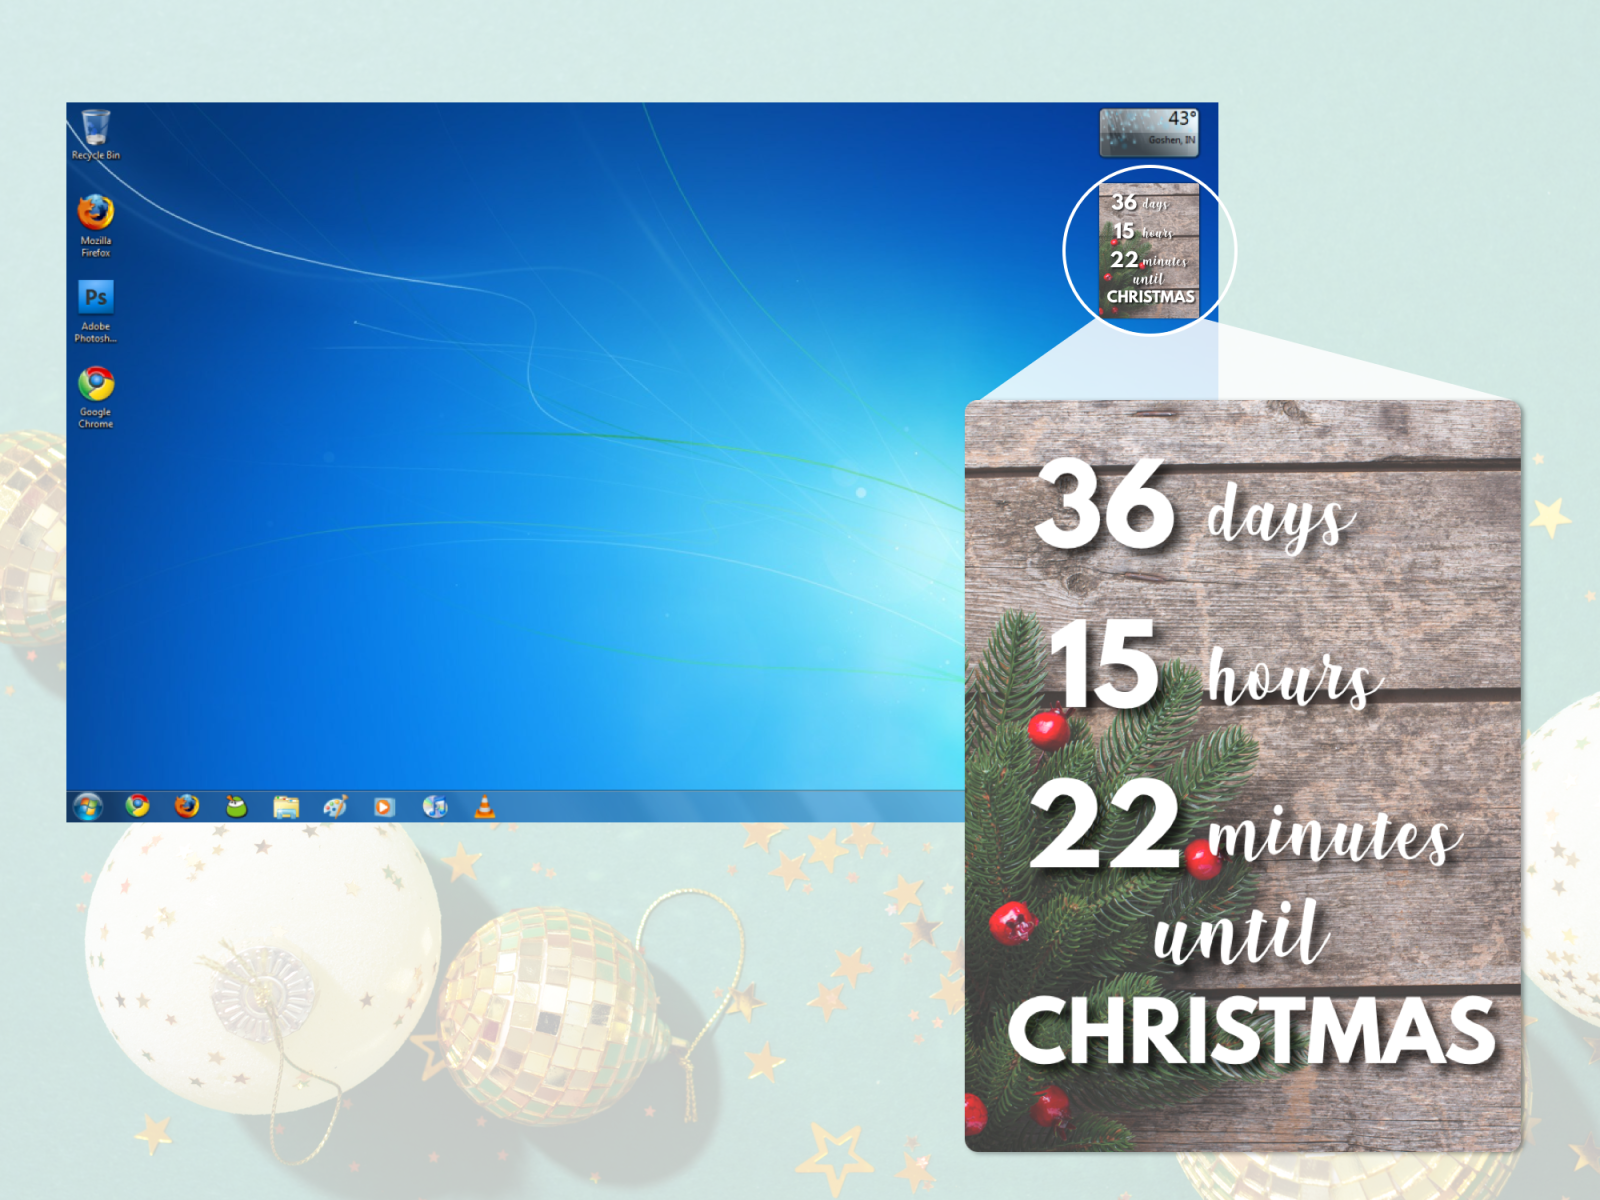 Christmas Countdown Widget by Ally Campbell on Dribbble